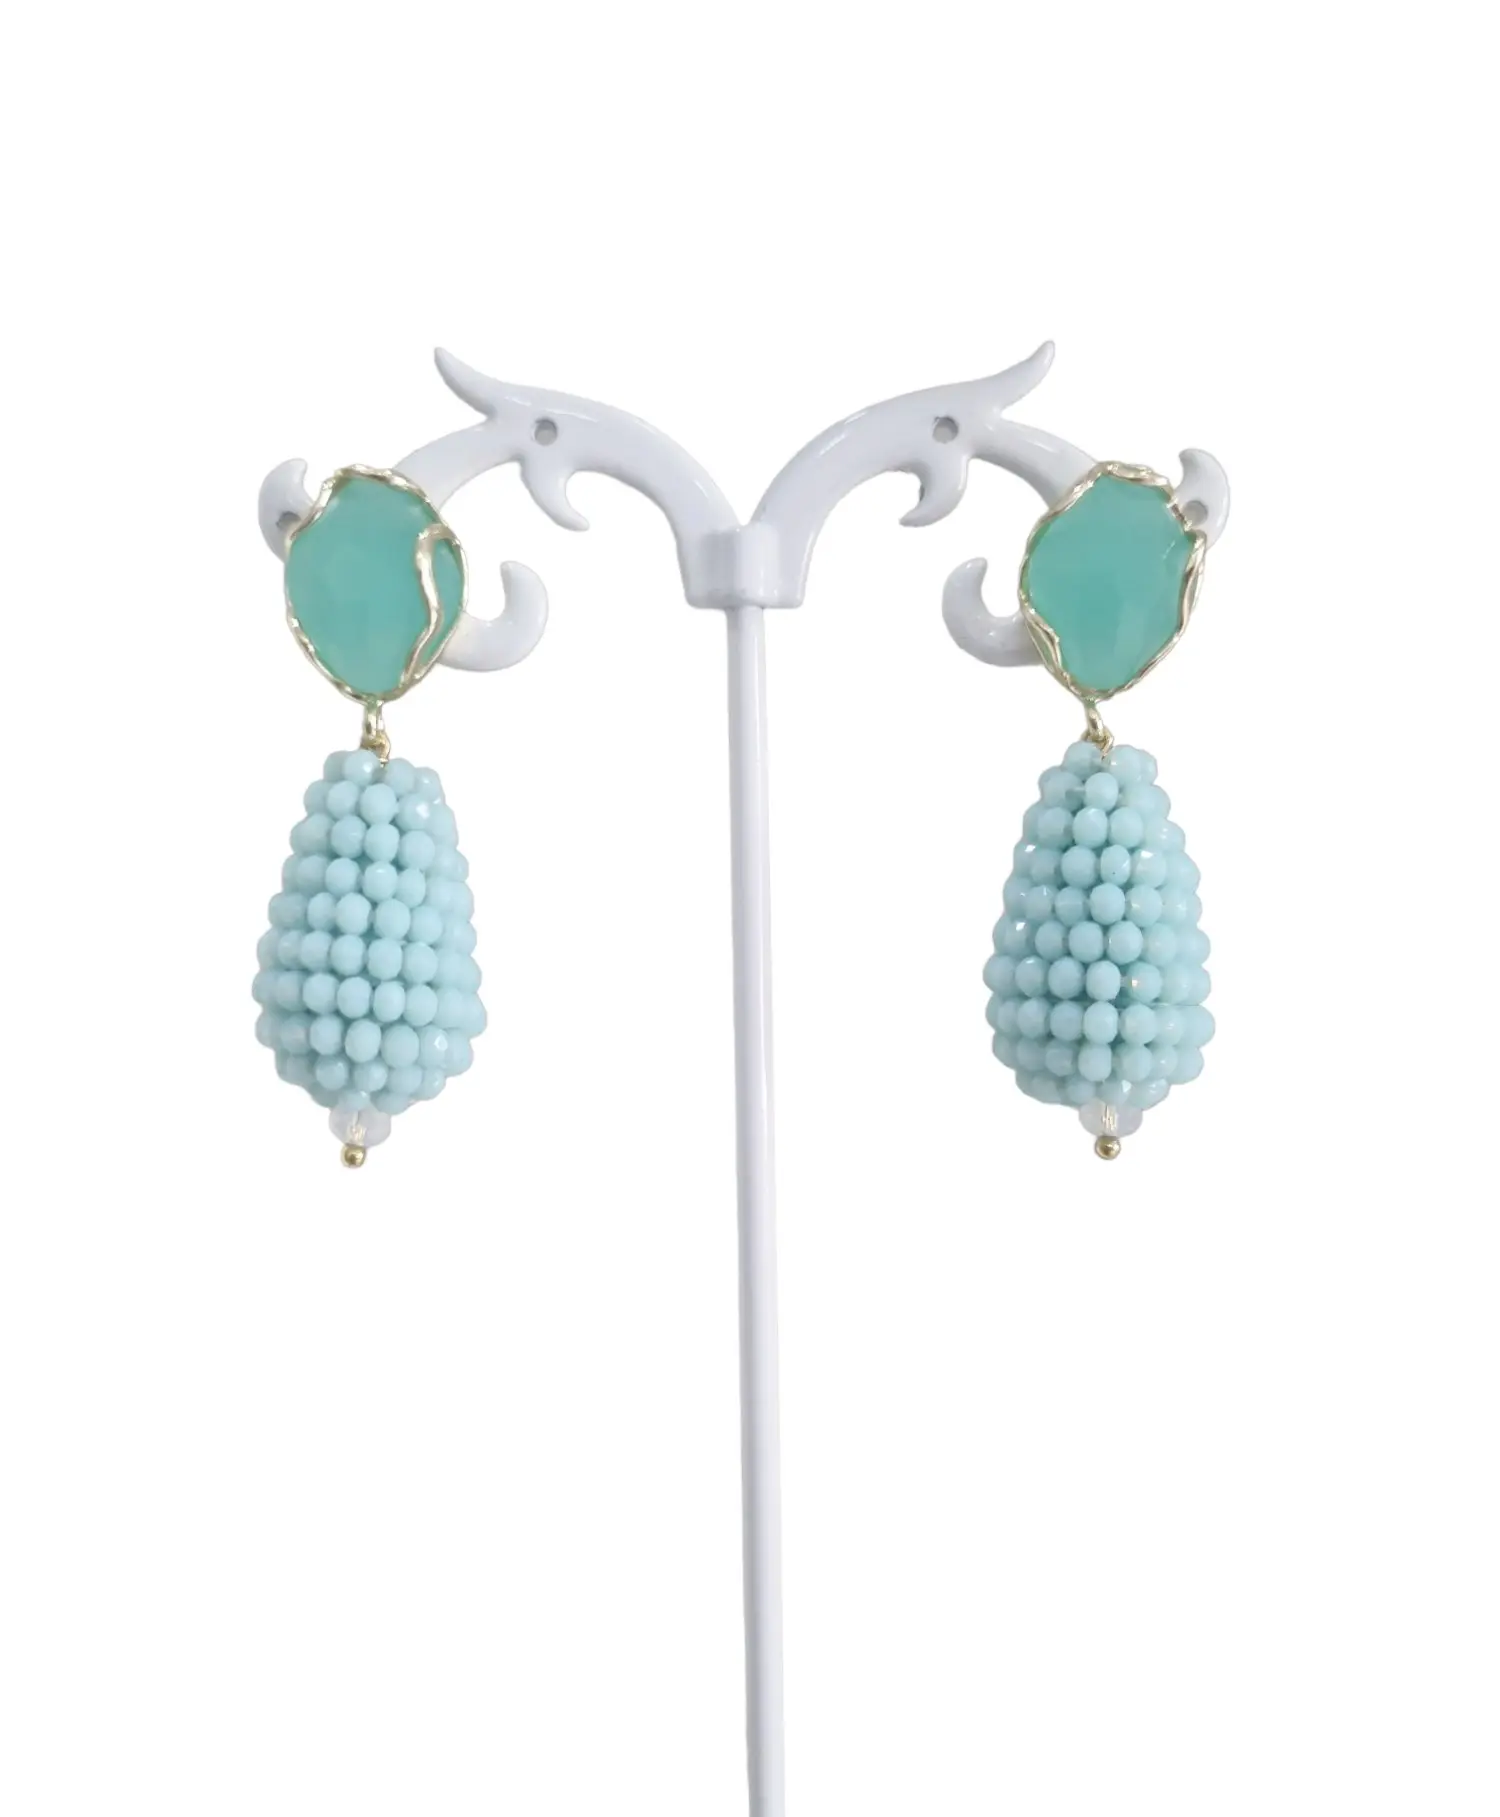 Earrings made with cat's eye stud and crystal drop – Aquamarine color Weight 6.8 g Length 4.5 cm